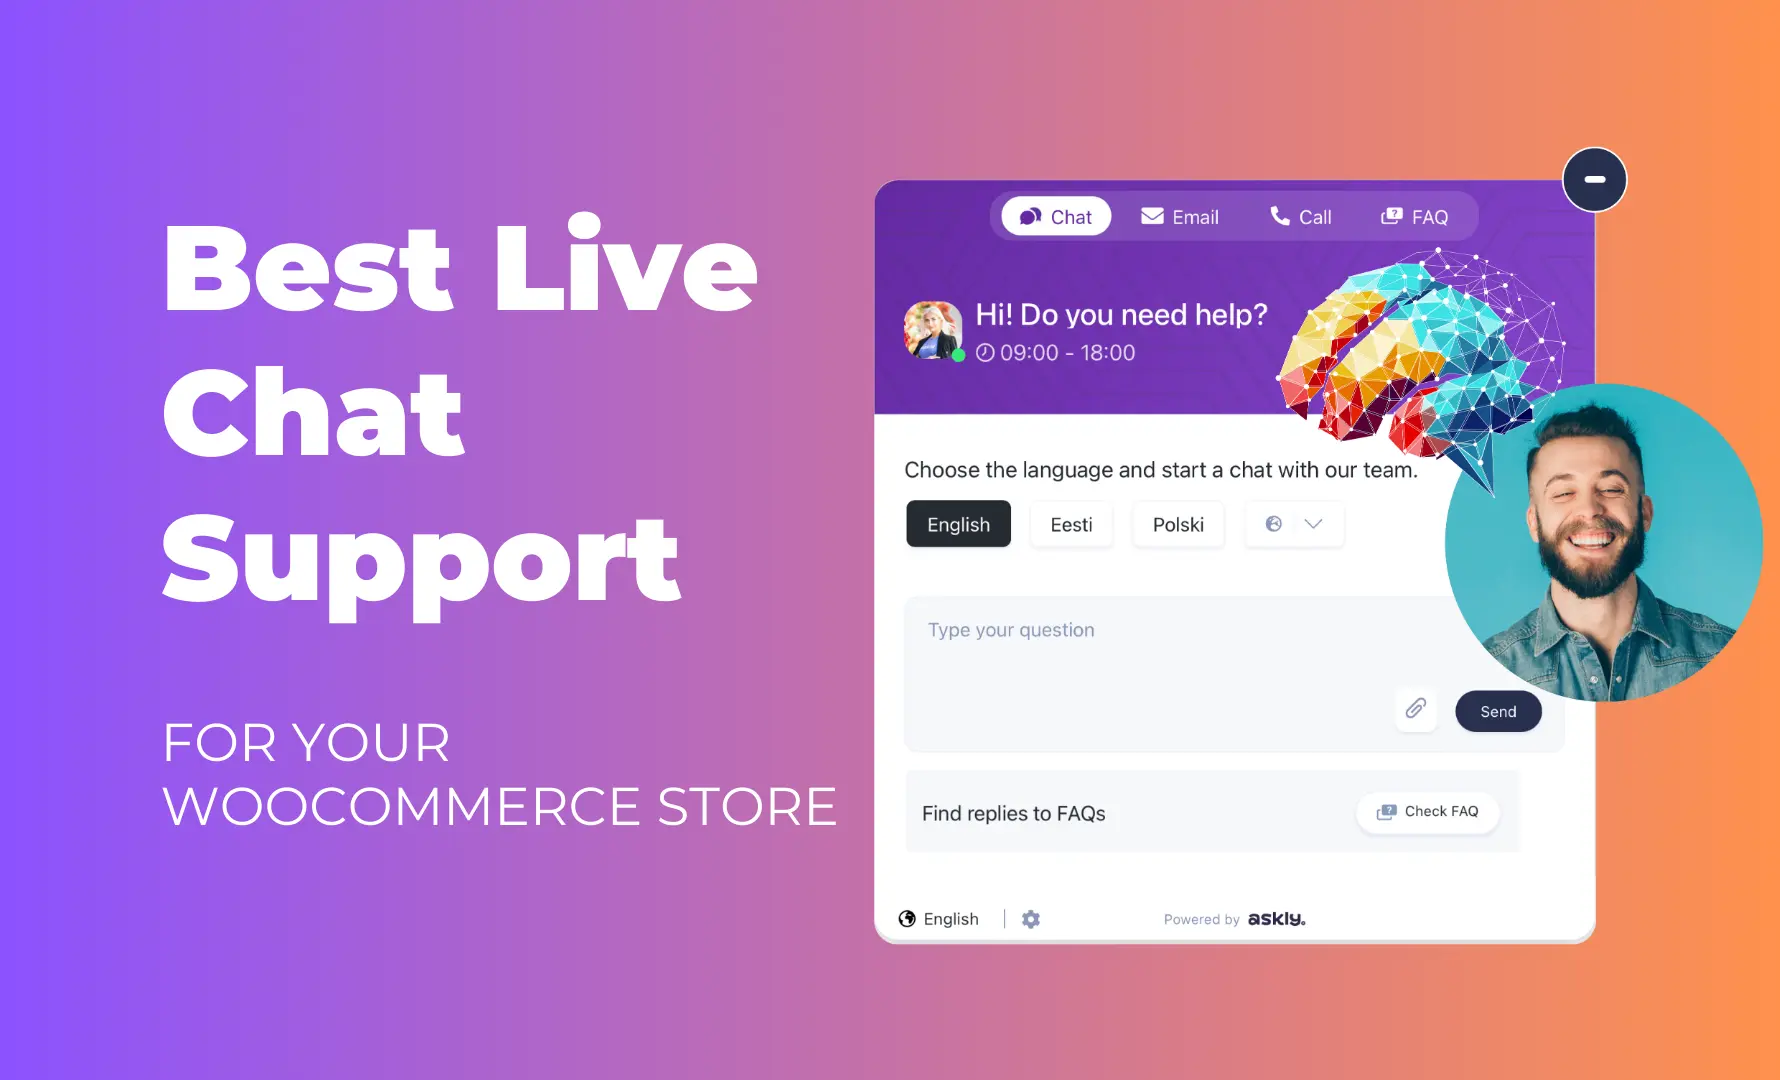 Boost Your Online Sales: Find the Best Live Chat Support for Your WooCommerce Store